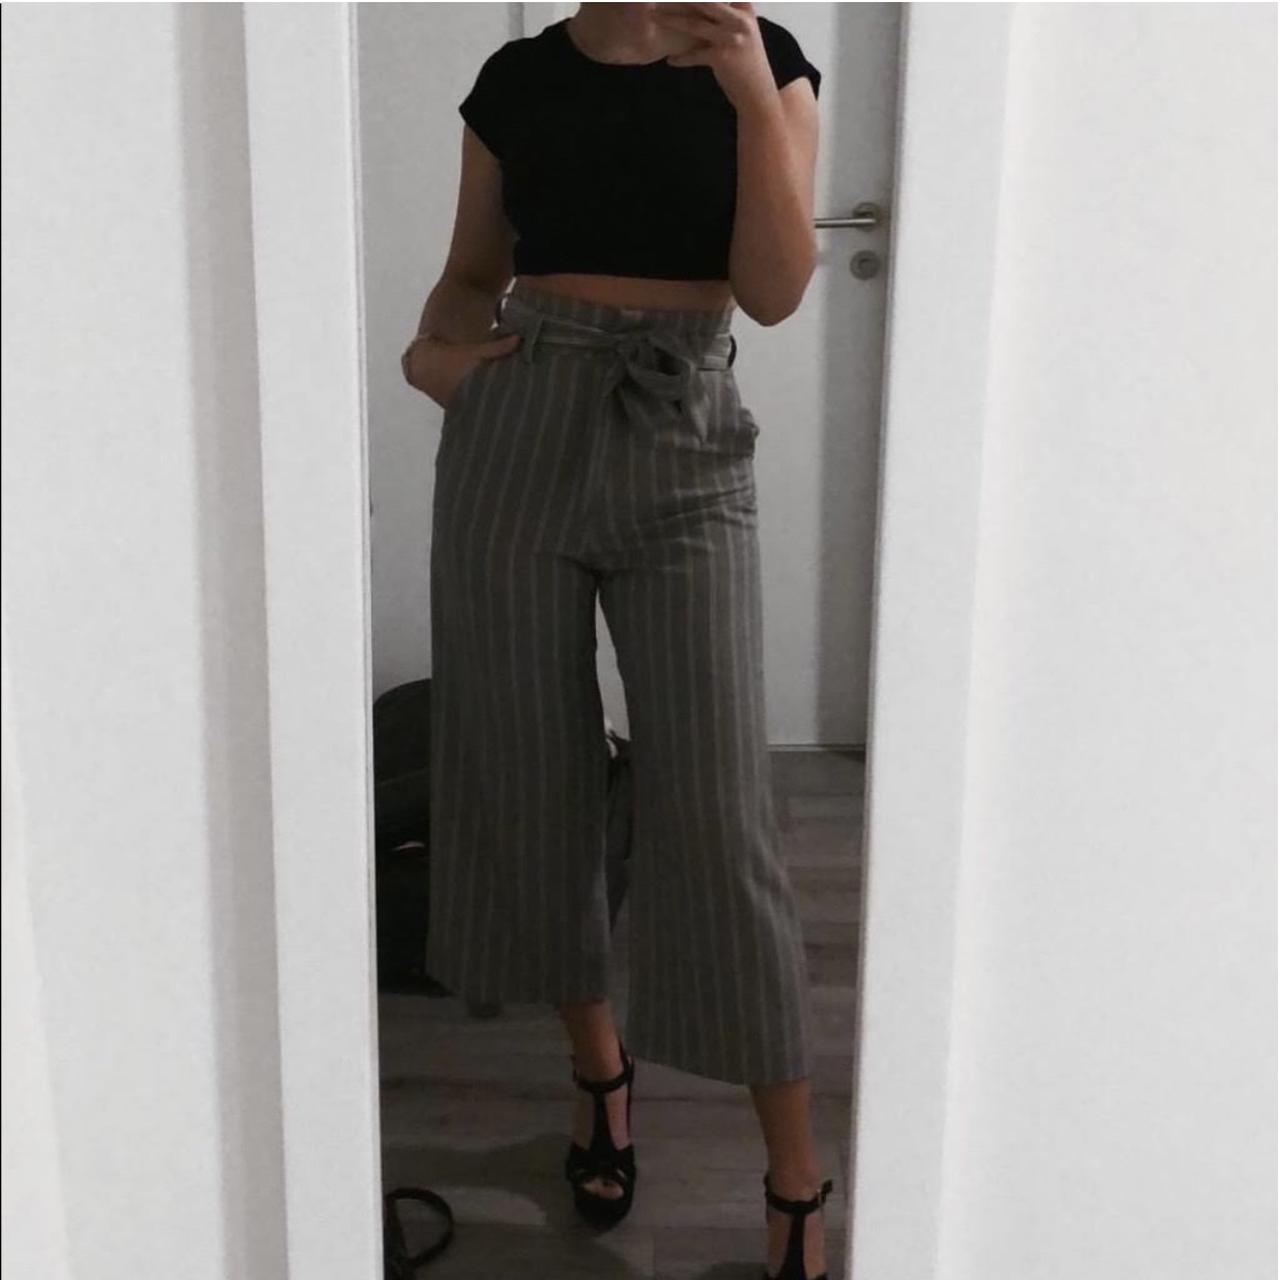 High waisted cute dress pants from H&M. I bought and - Depop